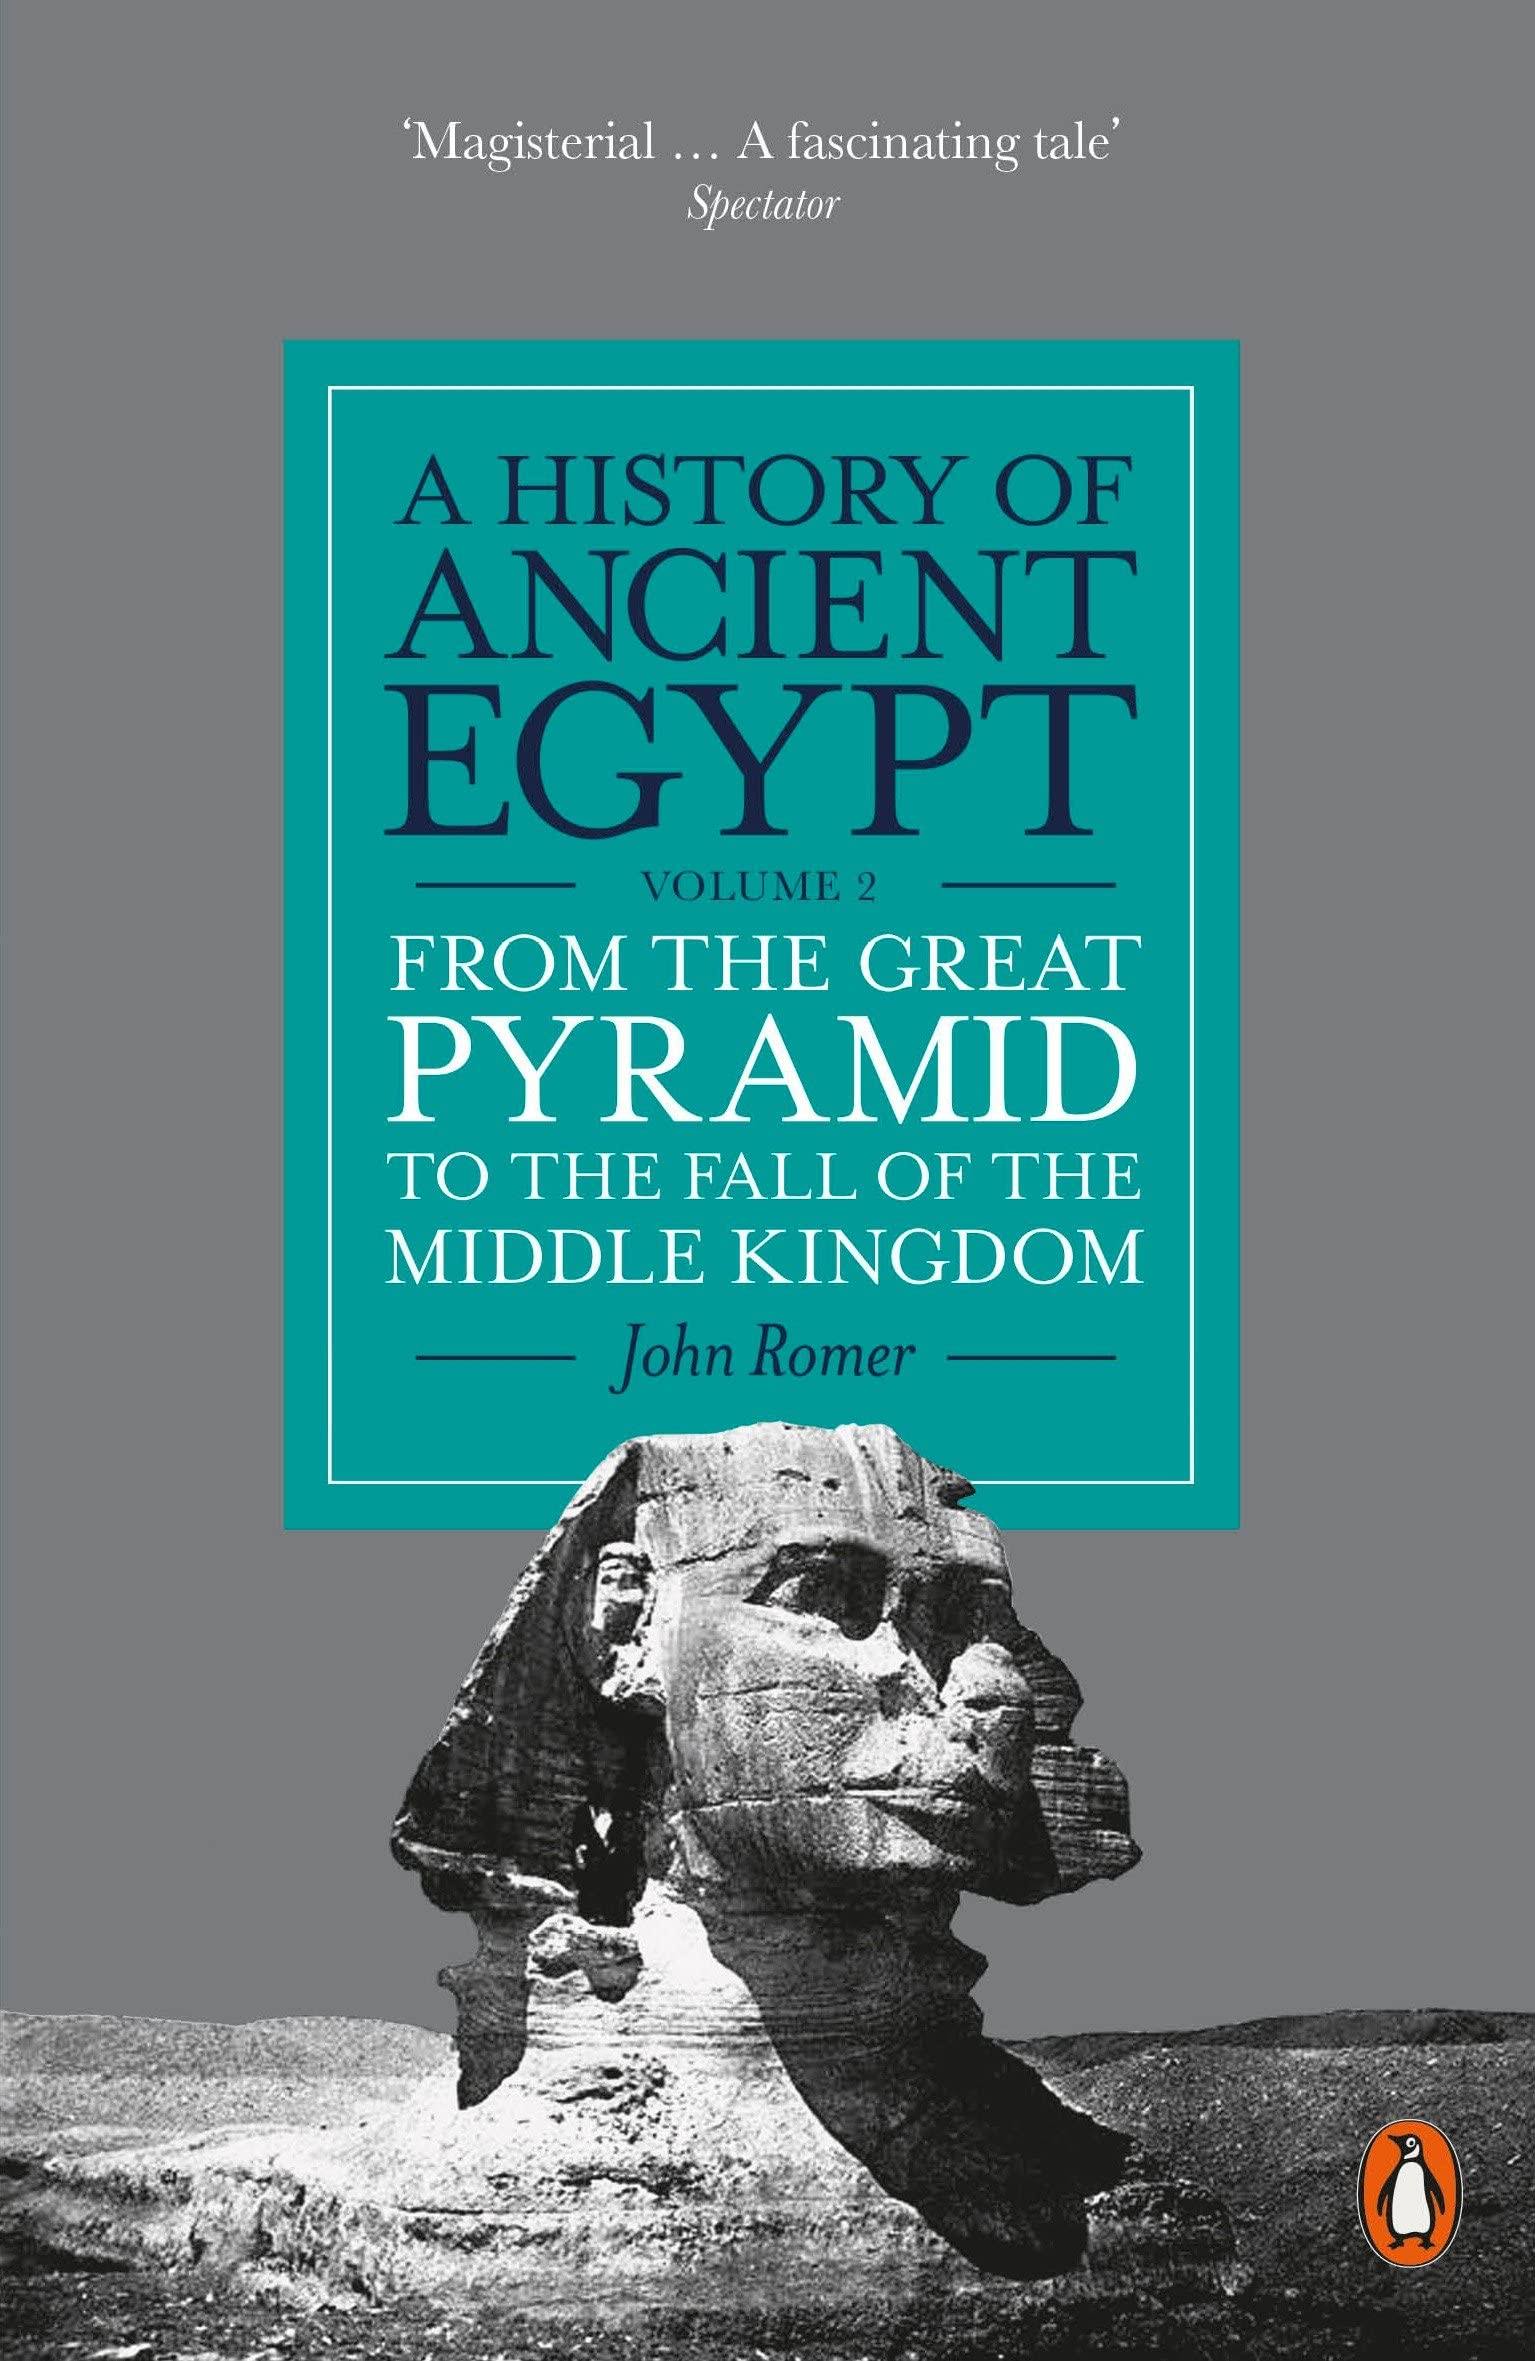 A History of Ancient Egypt, Volume 2: From the Great Pyramid to the Fall of the Middle Kingdom [Book]